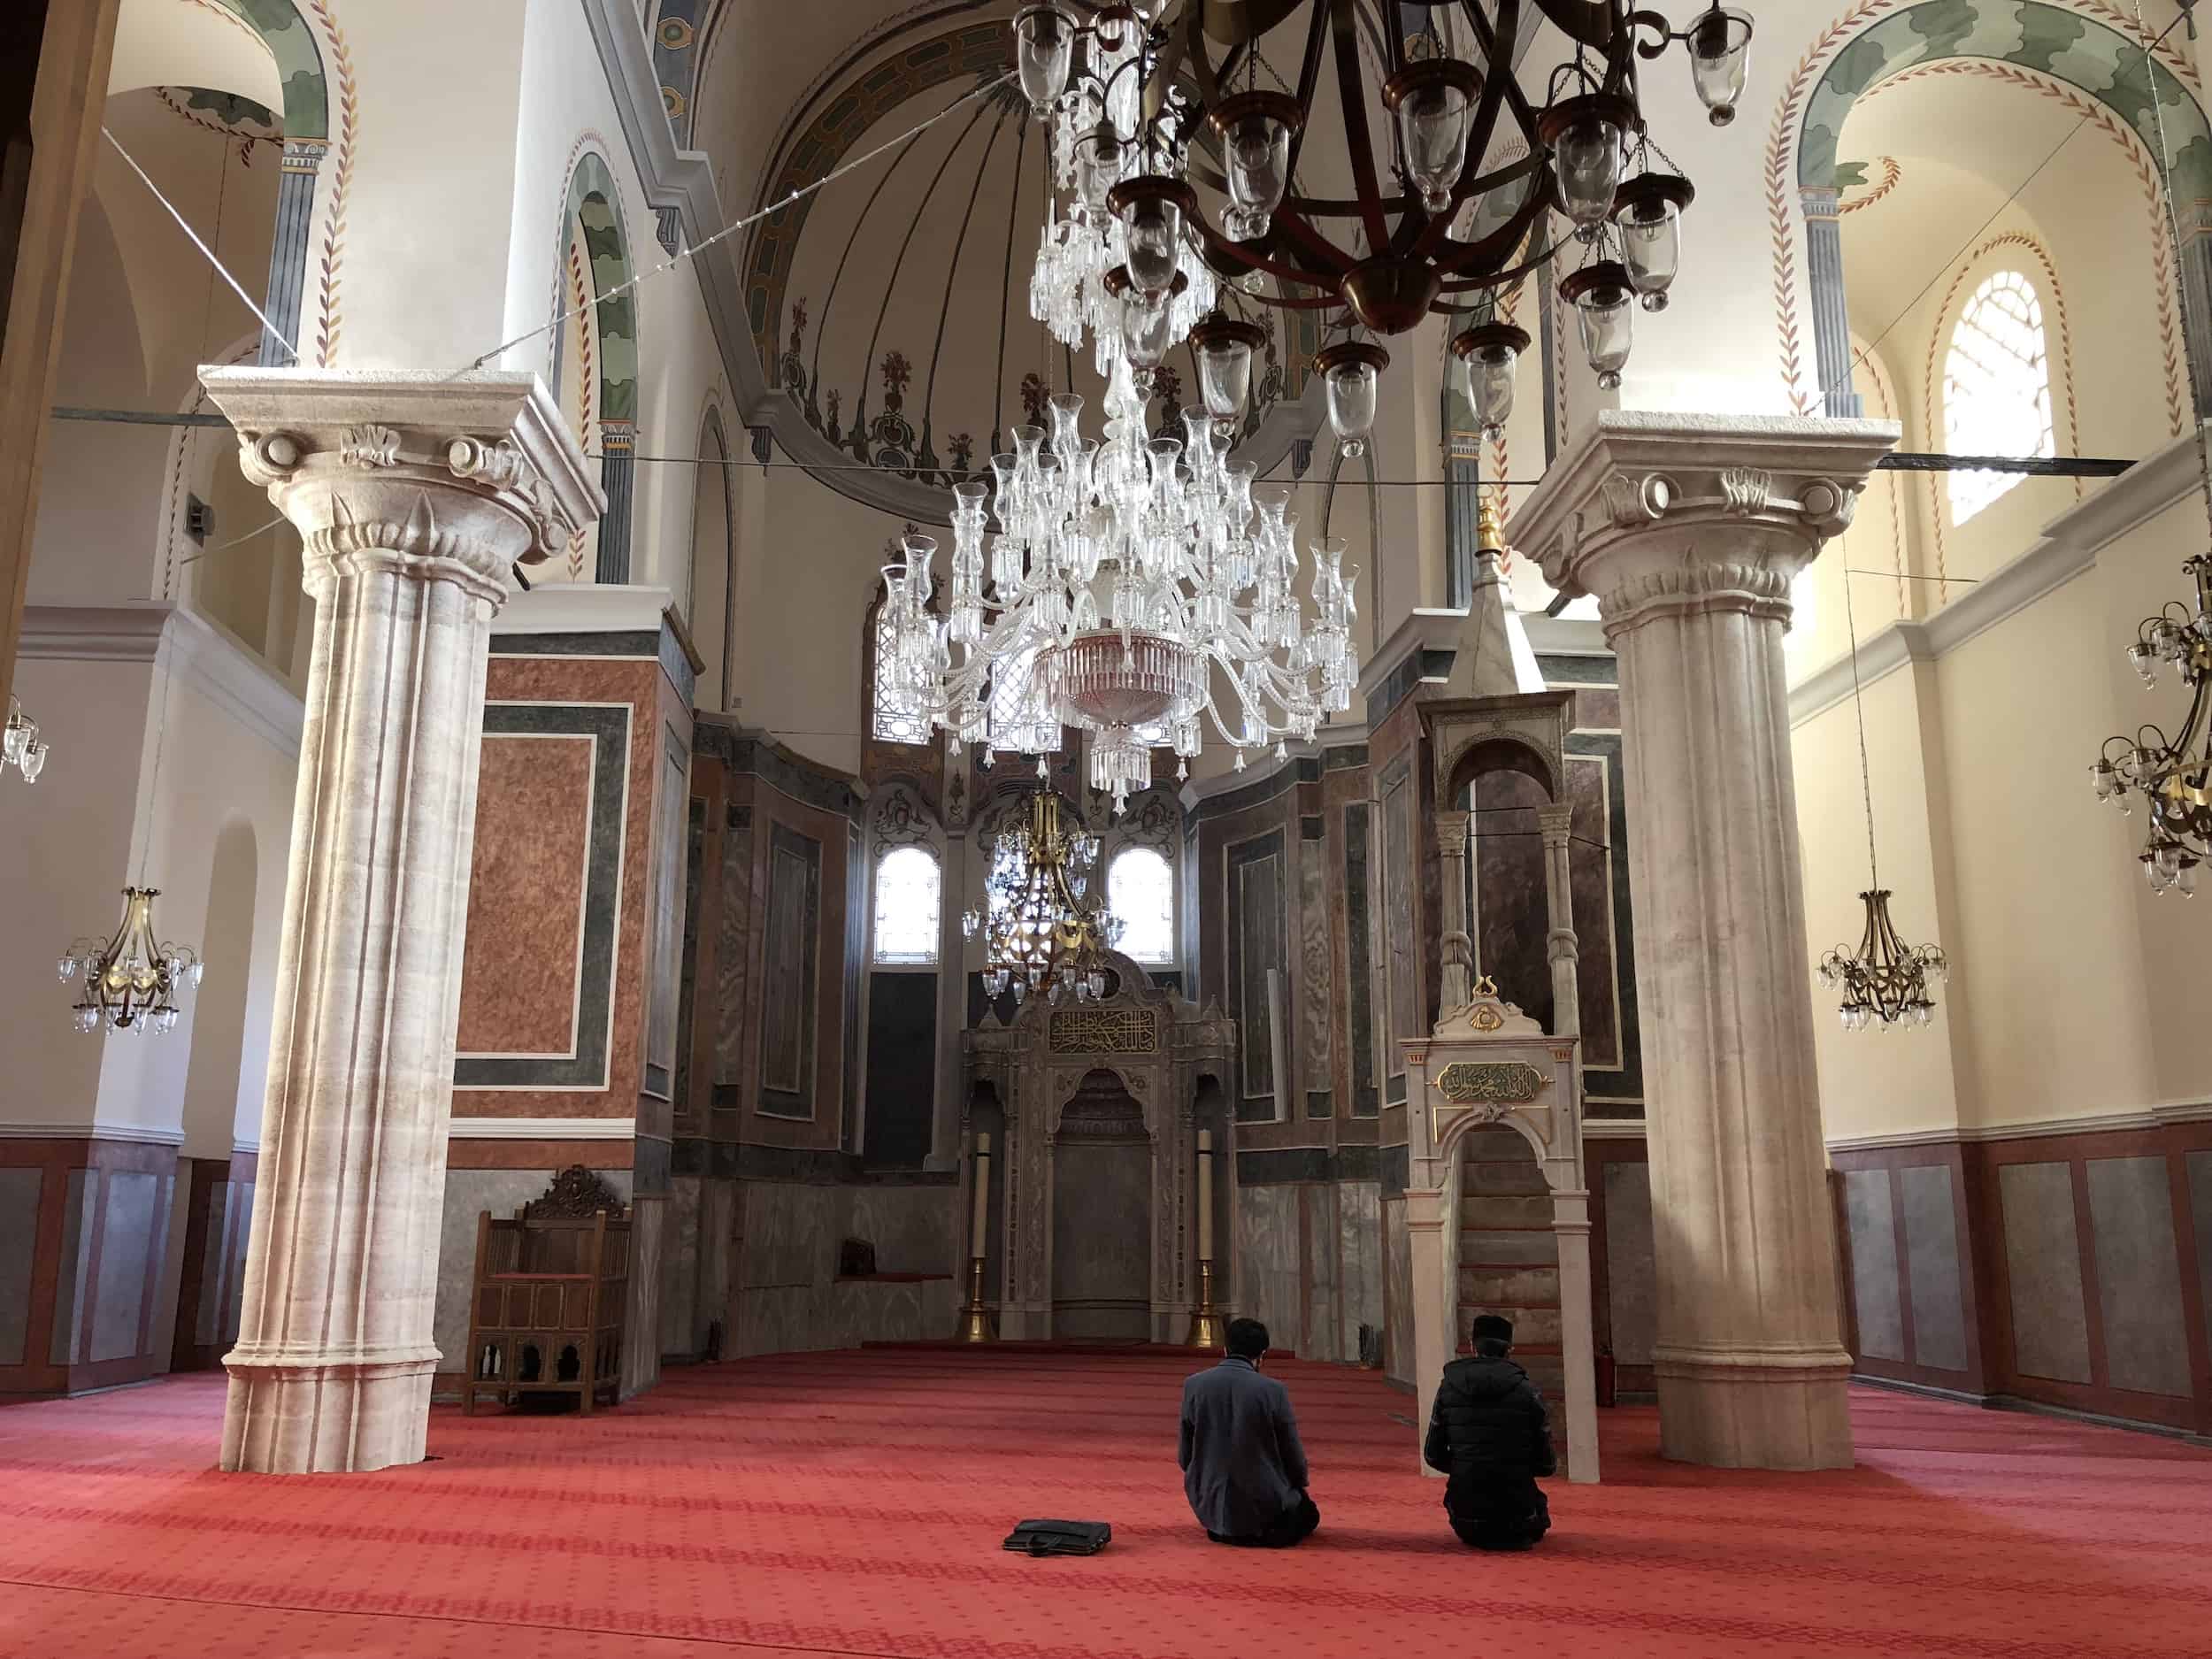 South church of the Zeyrek Mosque in Istanbul, Turkey